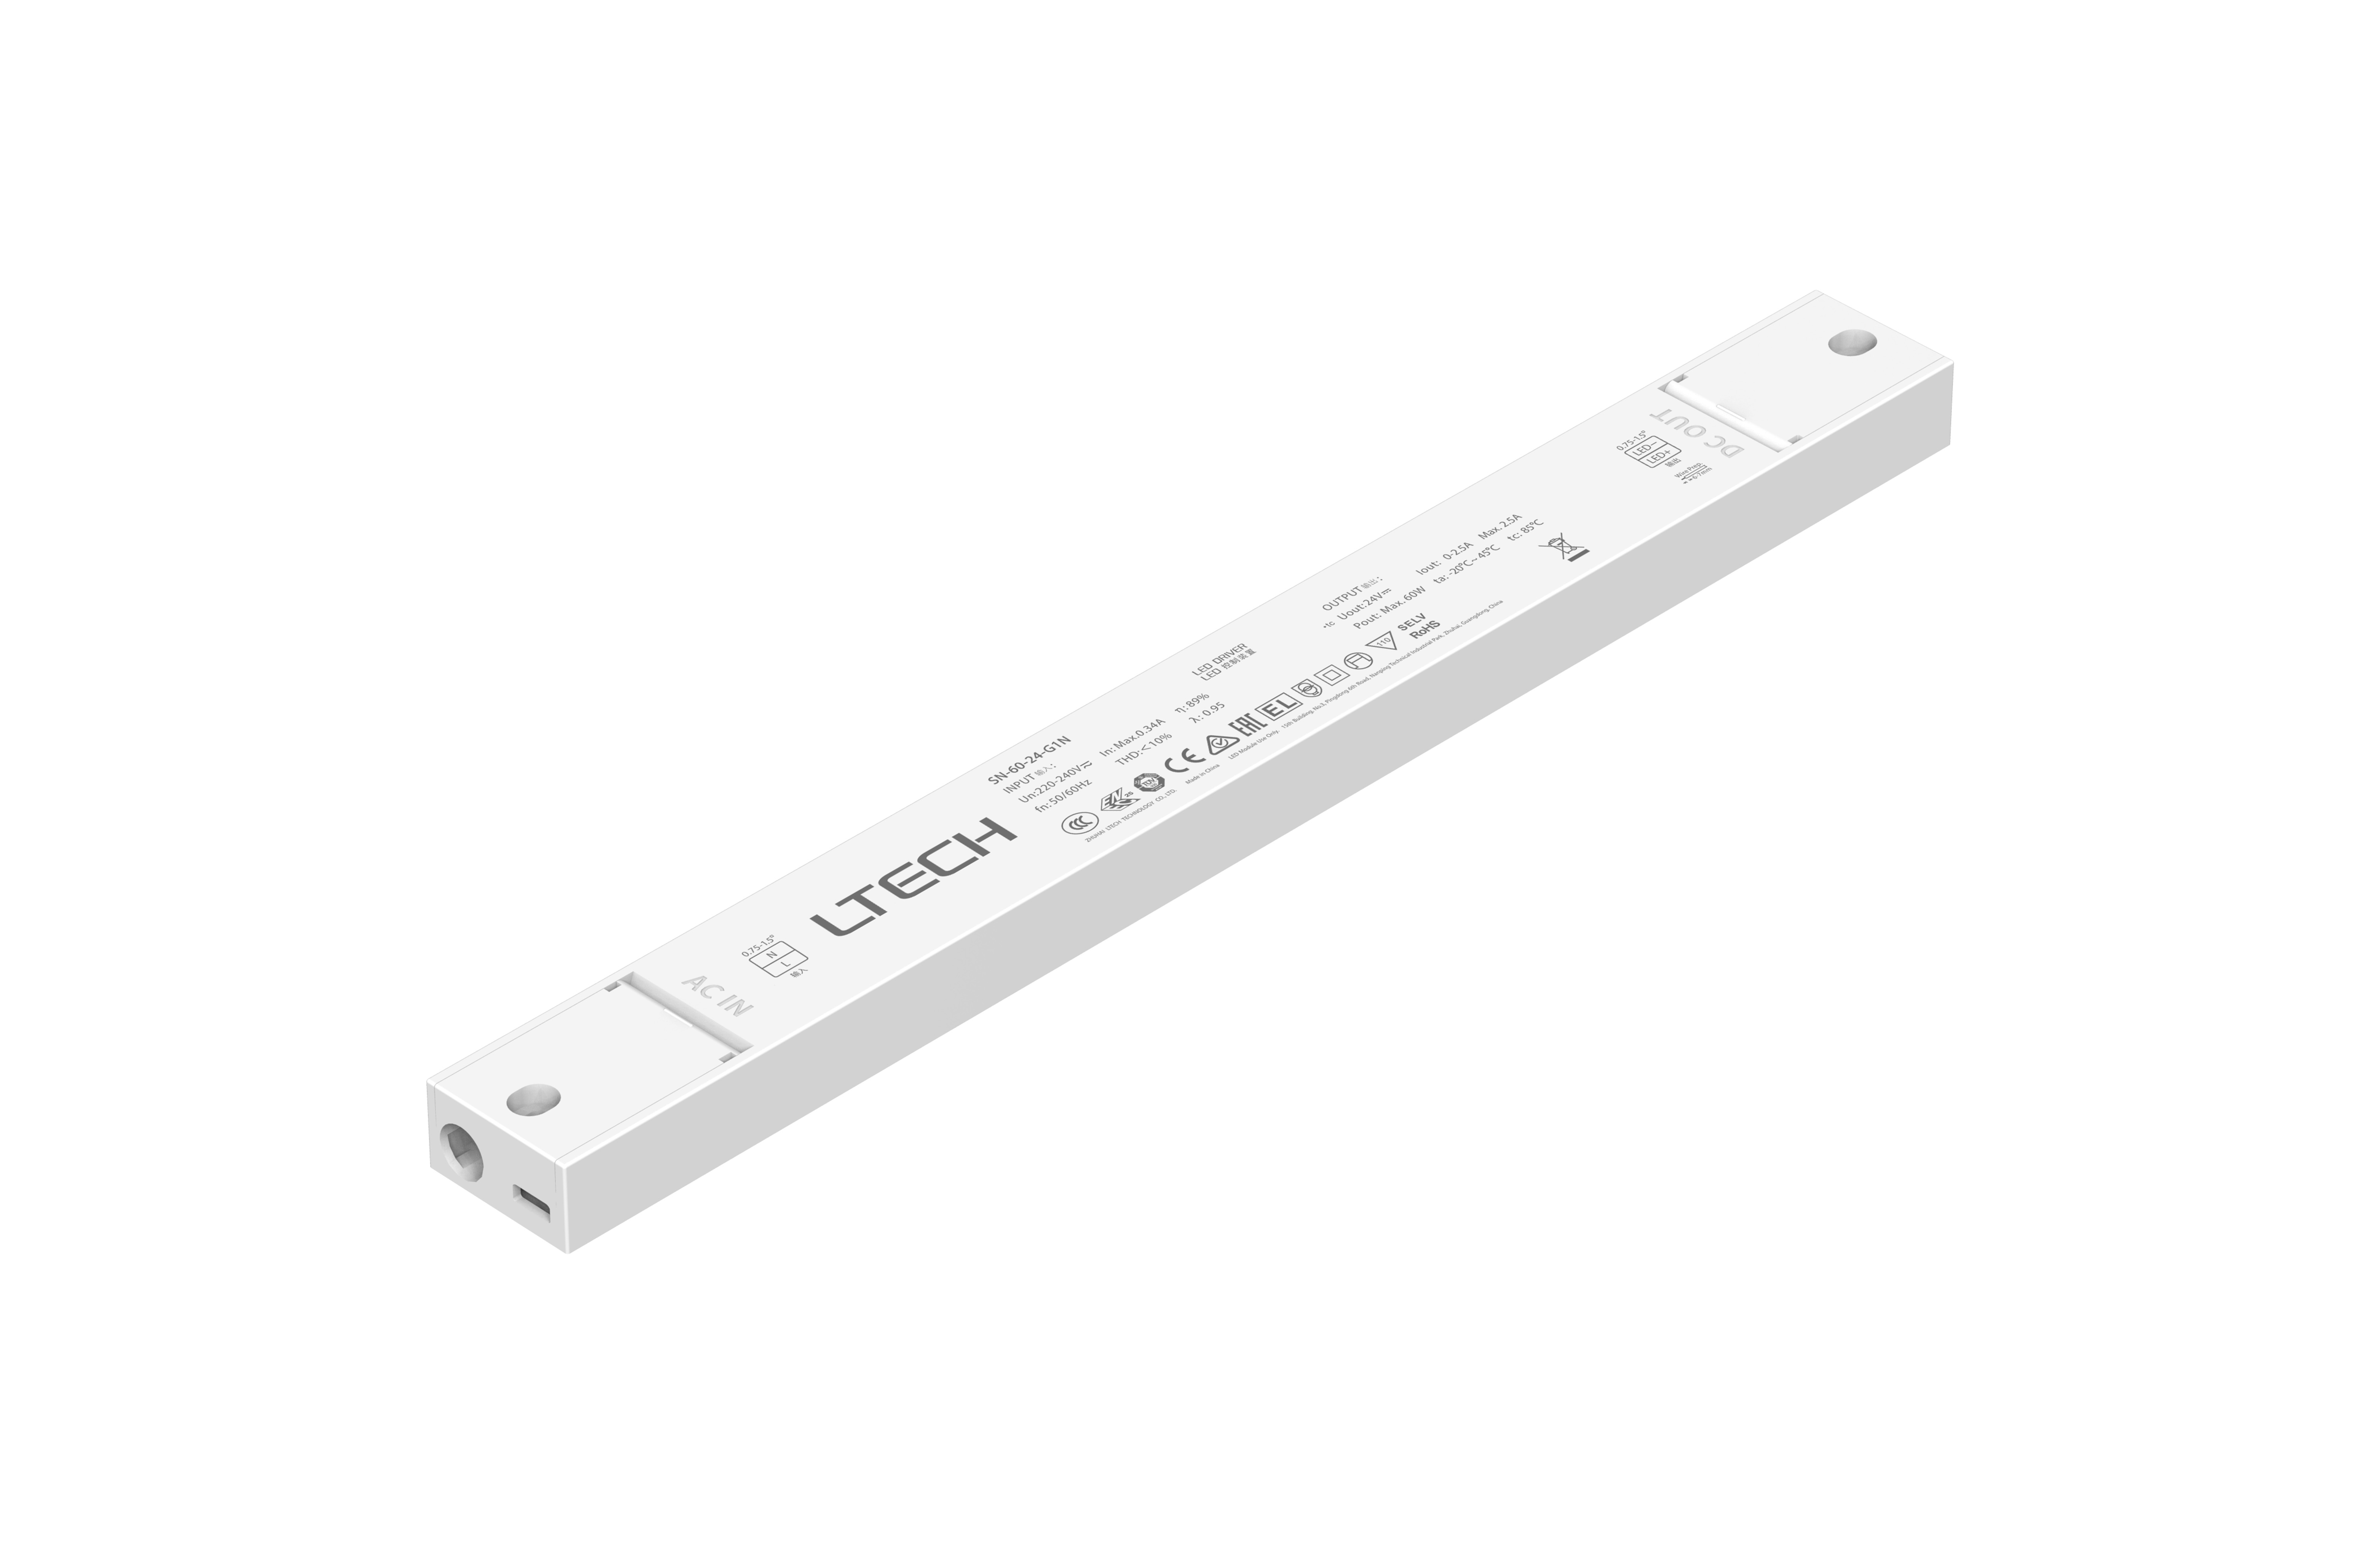 SN-60-24-G1N  Intelligent Constant Voltage  LED Driver, ON/OFF, 60W, 24VDC 2.5A , 220-240Vac, IP20, 5yrs Warrenty.